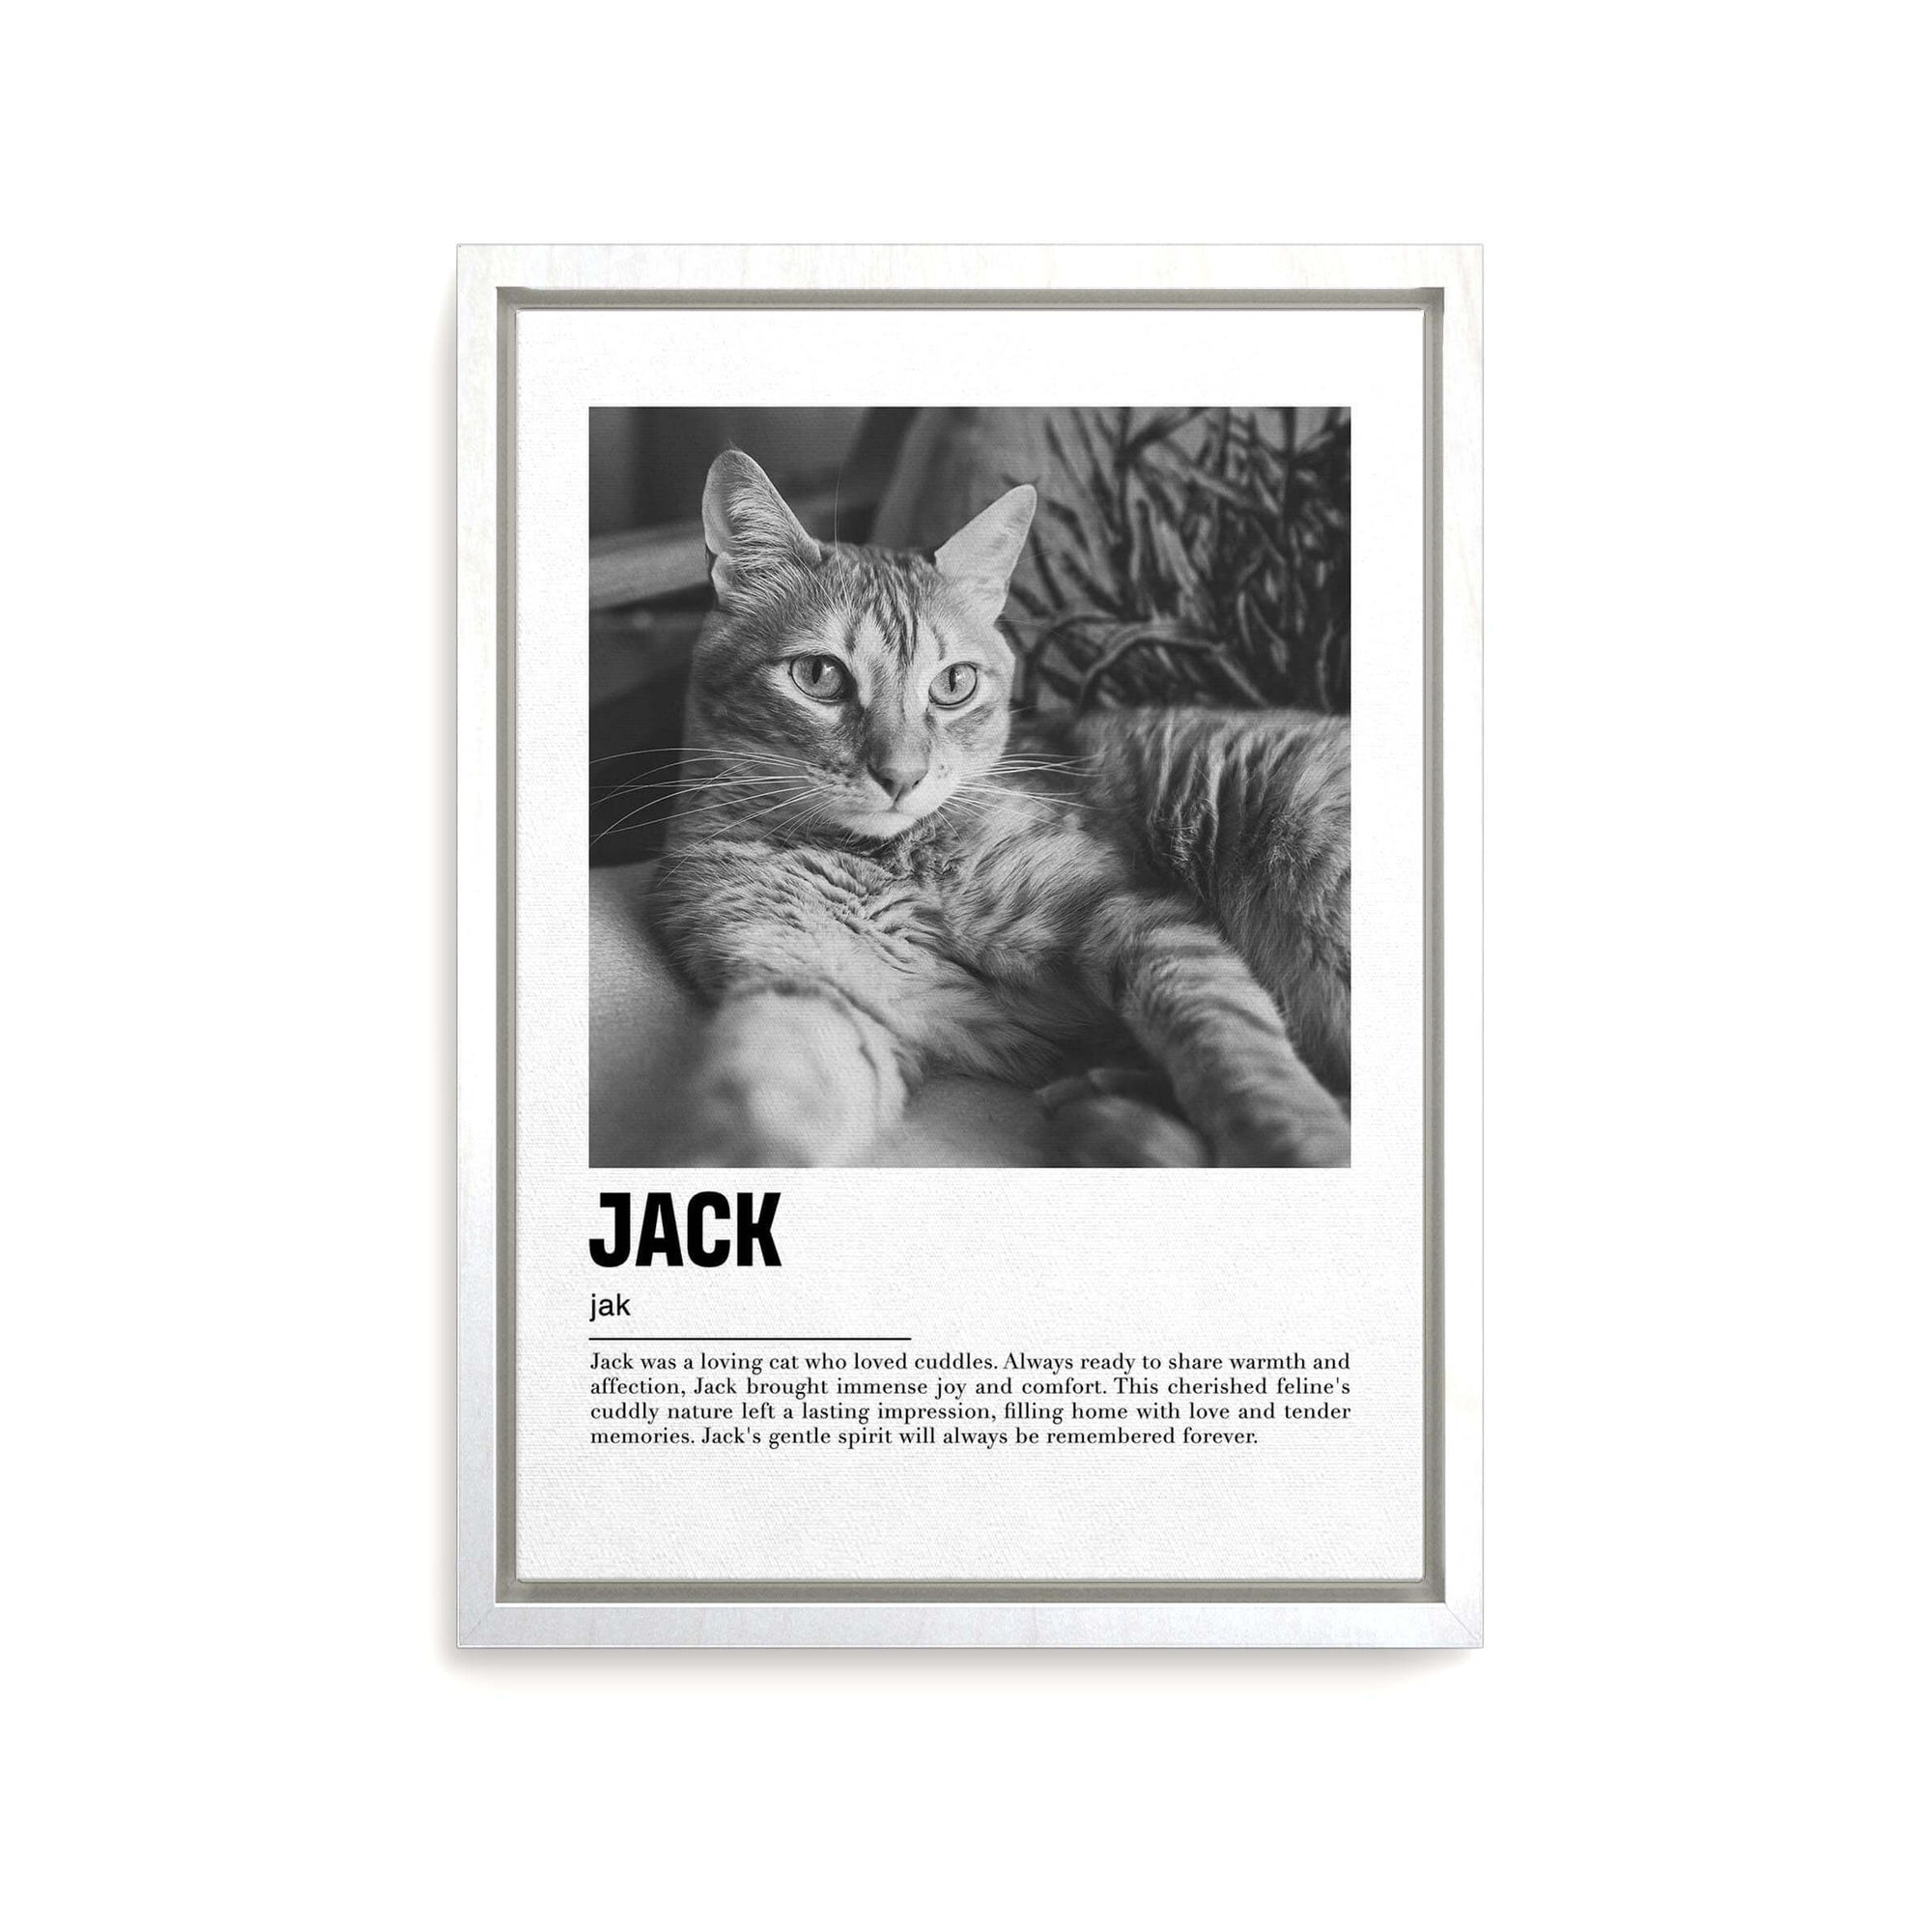 Personalized cat portrait on canvas with custom details, featuring a custom photo of a beloved feline. Ideal for custom pet portraits, this artwork serves as a beautiful cat memorial gift or personal pet art for the home. Perfect for custom pet canvas, personalized pet portrait art, and custom cat artwork.